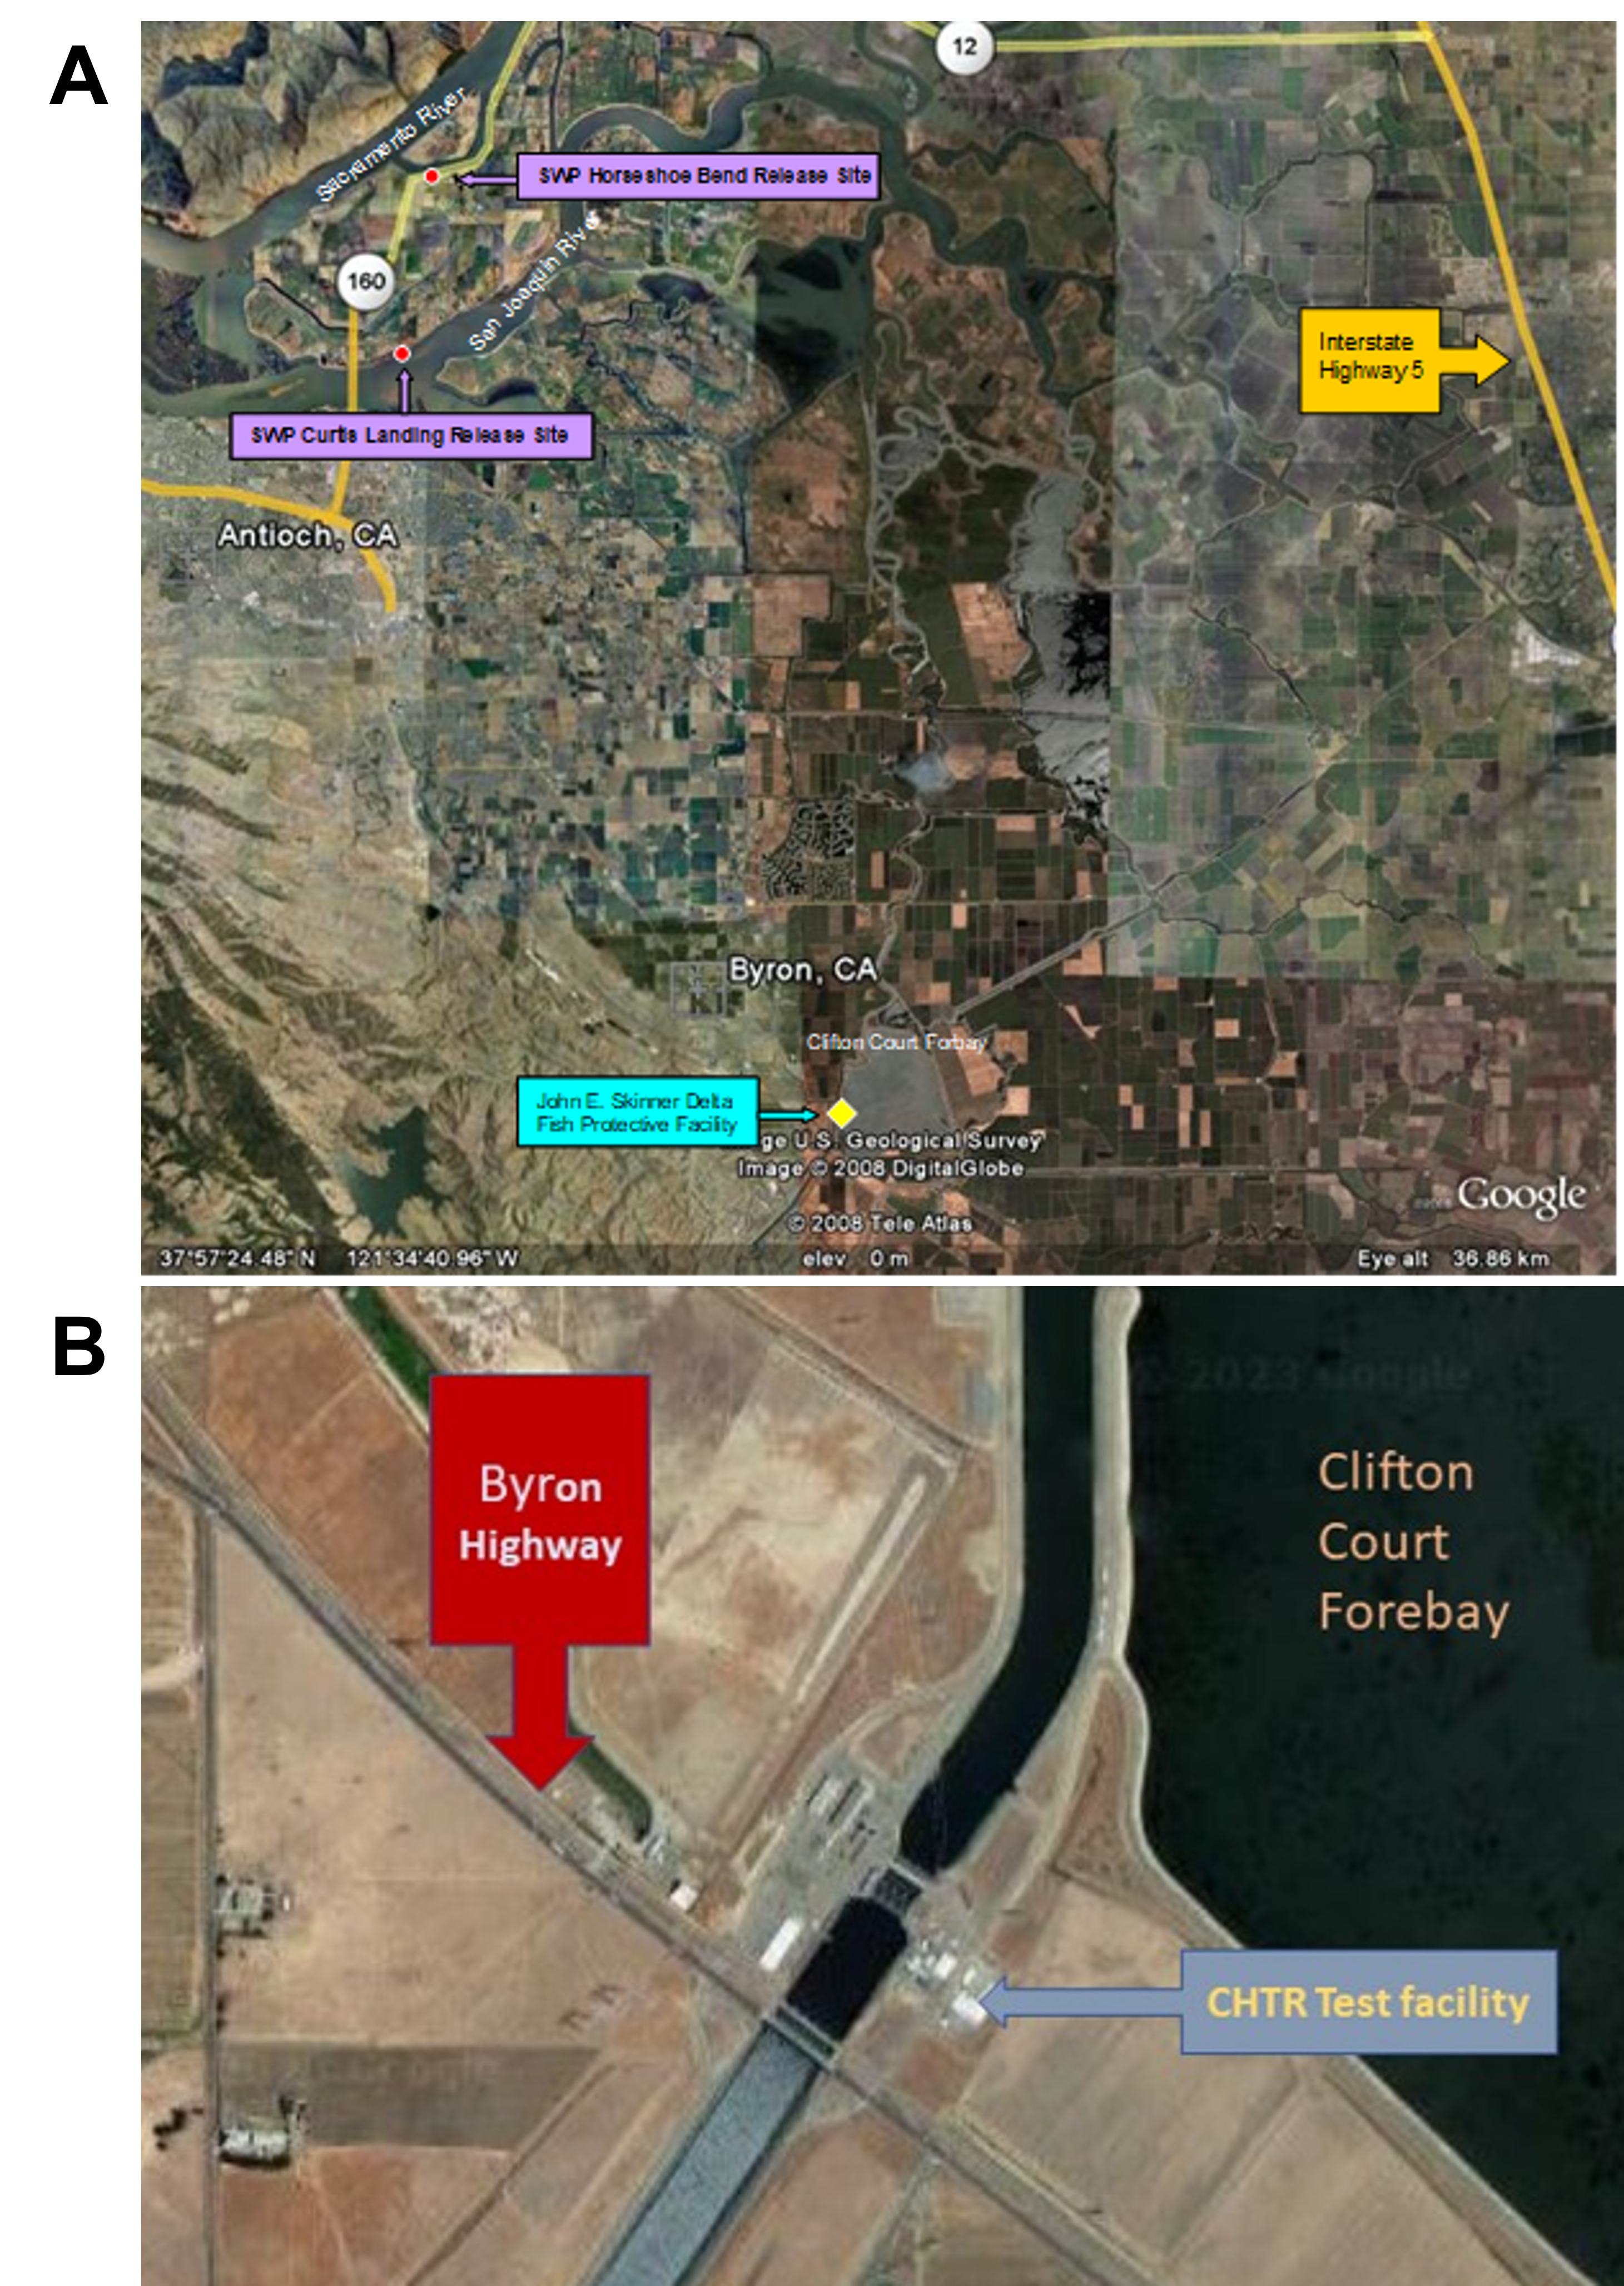 Two aerial maps. Map A is a wide angle view with the town of Byron, Clifton Court Forebay, and the John E. Skinner Delta Fish Protective Facility at the bottom of the map, the confluence of the Sacramento and San Joaquin rivers in the upper left corner of the map, and Interstate Highway 5 in the upper right corner of the map. Map B is a closer view with the CHTR test facility in the center of the map, Clifton Court Forebay on the right side of the map, and Byron Highway cutting through from the upper left corner to the lower right portion of the map.